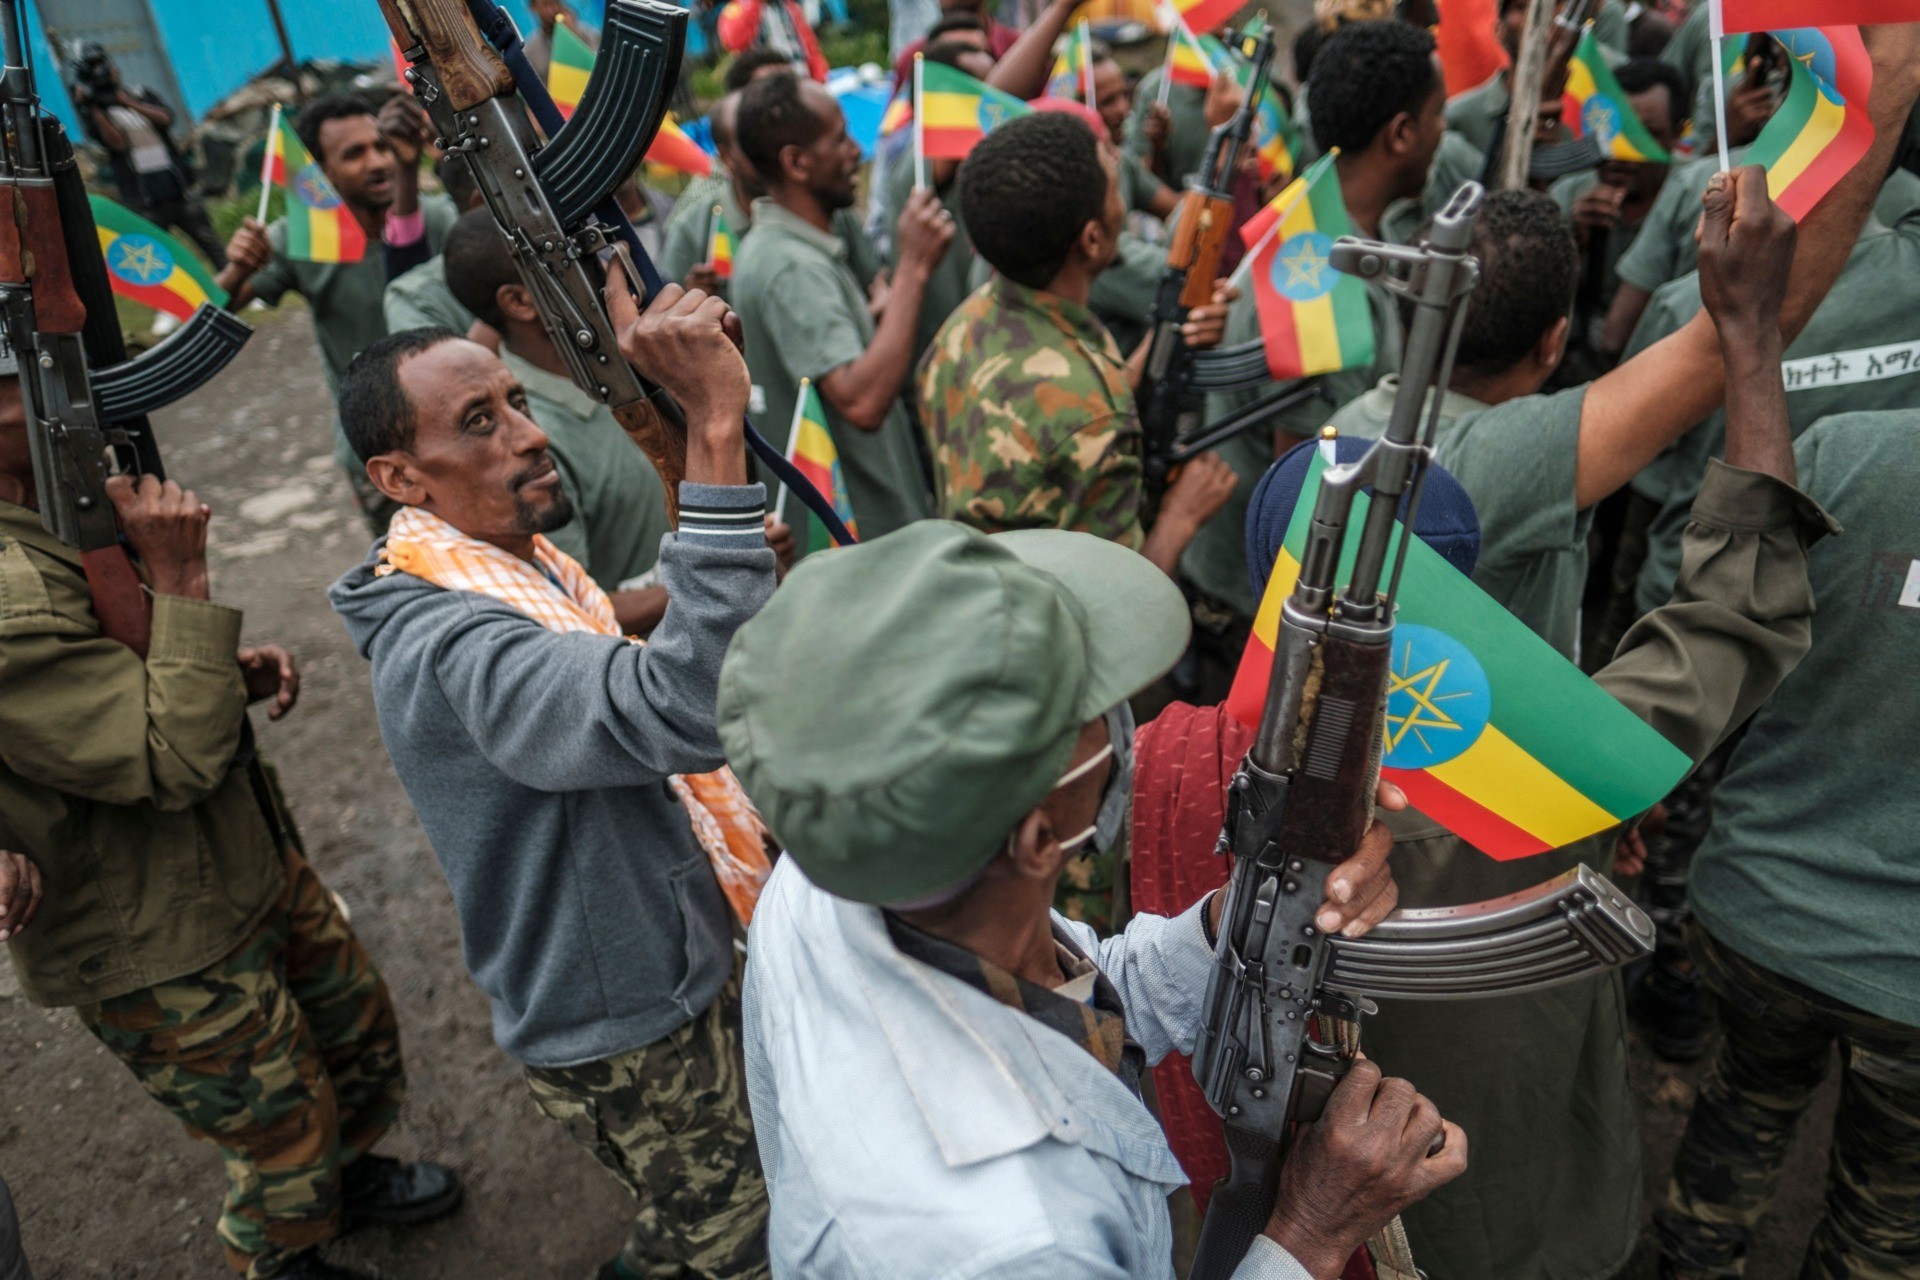 Recruits for reserves of Amhara regional forces, together with members of the Amhara militia, celebrate during their graduation ceremony, in the city of Dessie, Ethiopia, on August 24, 2021. - Long confined to Tigray, the conflict in Ethiopia has recently spread to two neighbouring regions, Afar and Amhara, with heavy weapons fire killing an untold number of civilians and displacing hundreds of thousands more. (Photo by EDUARDO SOTERAS / AFP) (Photo by EDUARDO SOTERAS/AFP via Getty Images)